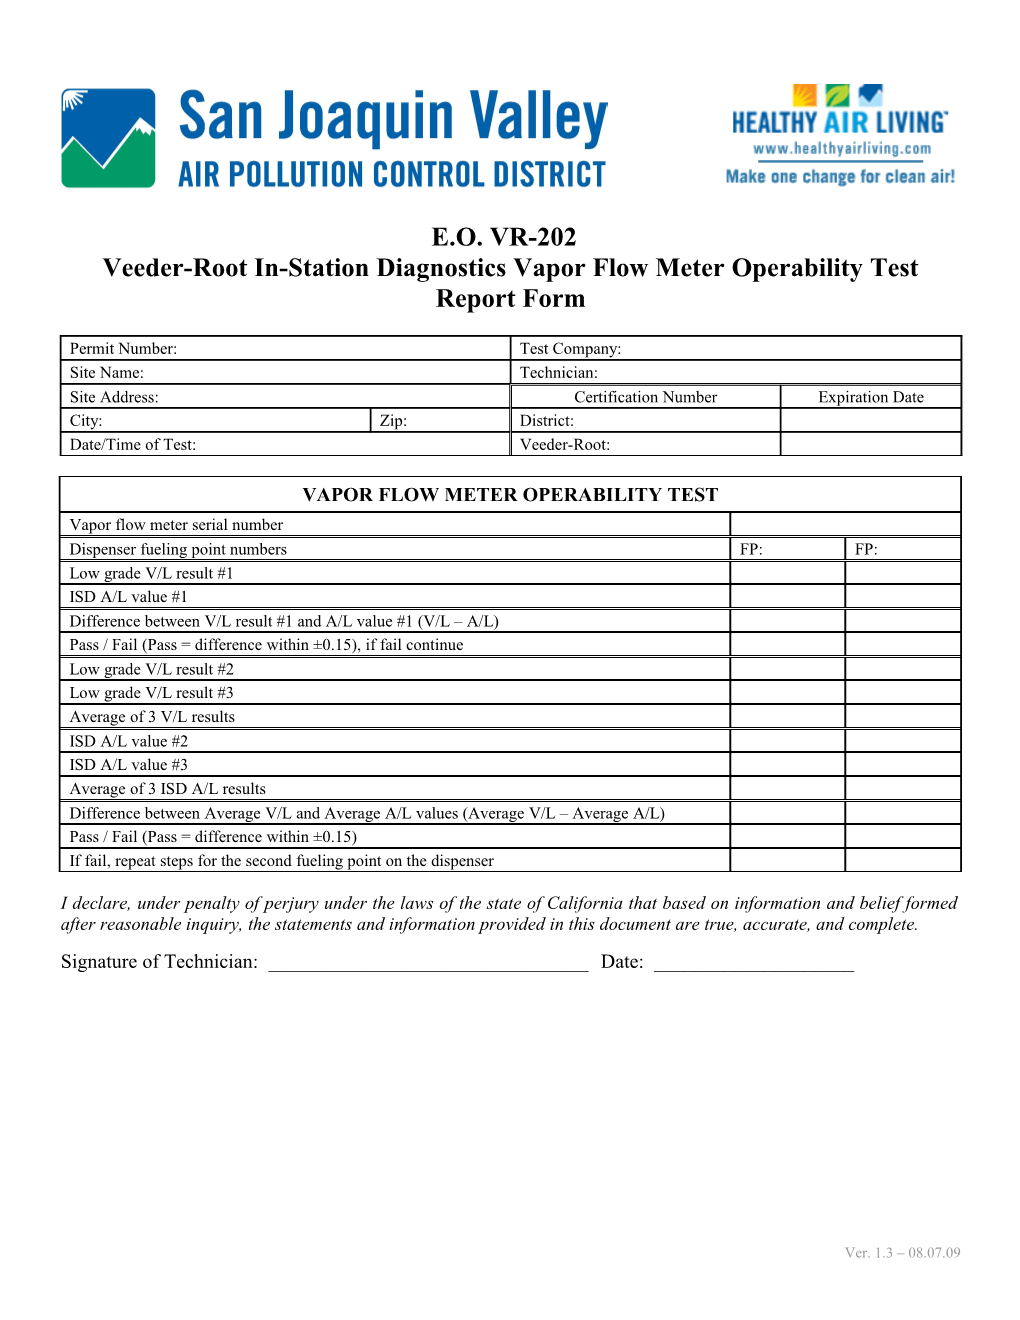 Joaquin Valley Air Pollution Control District